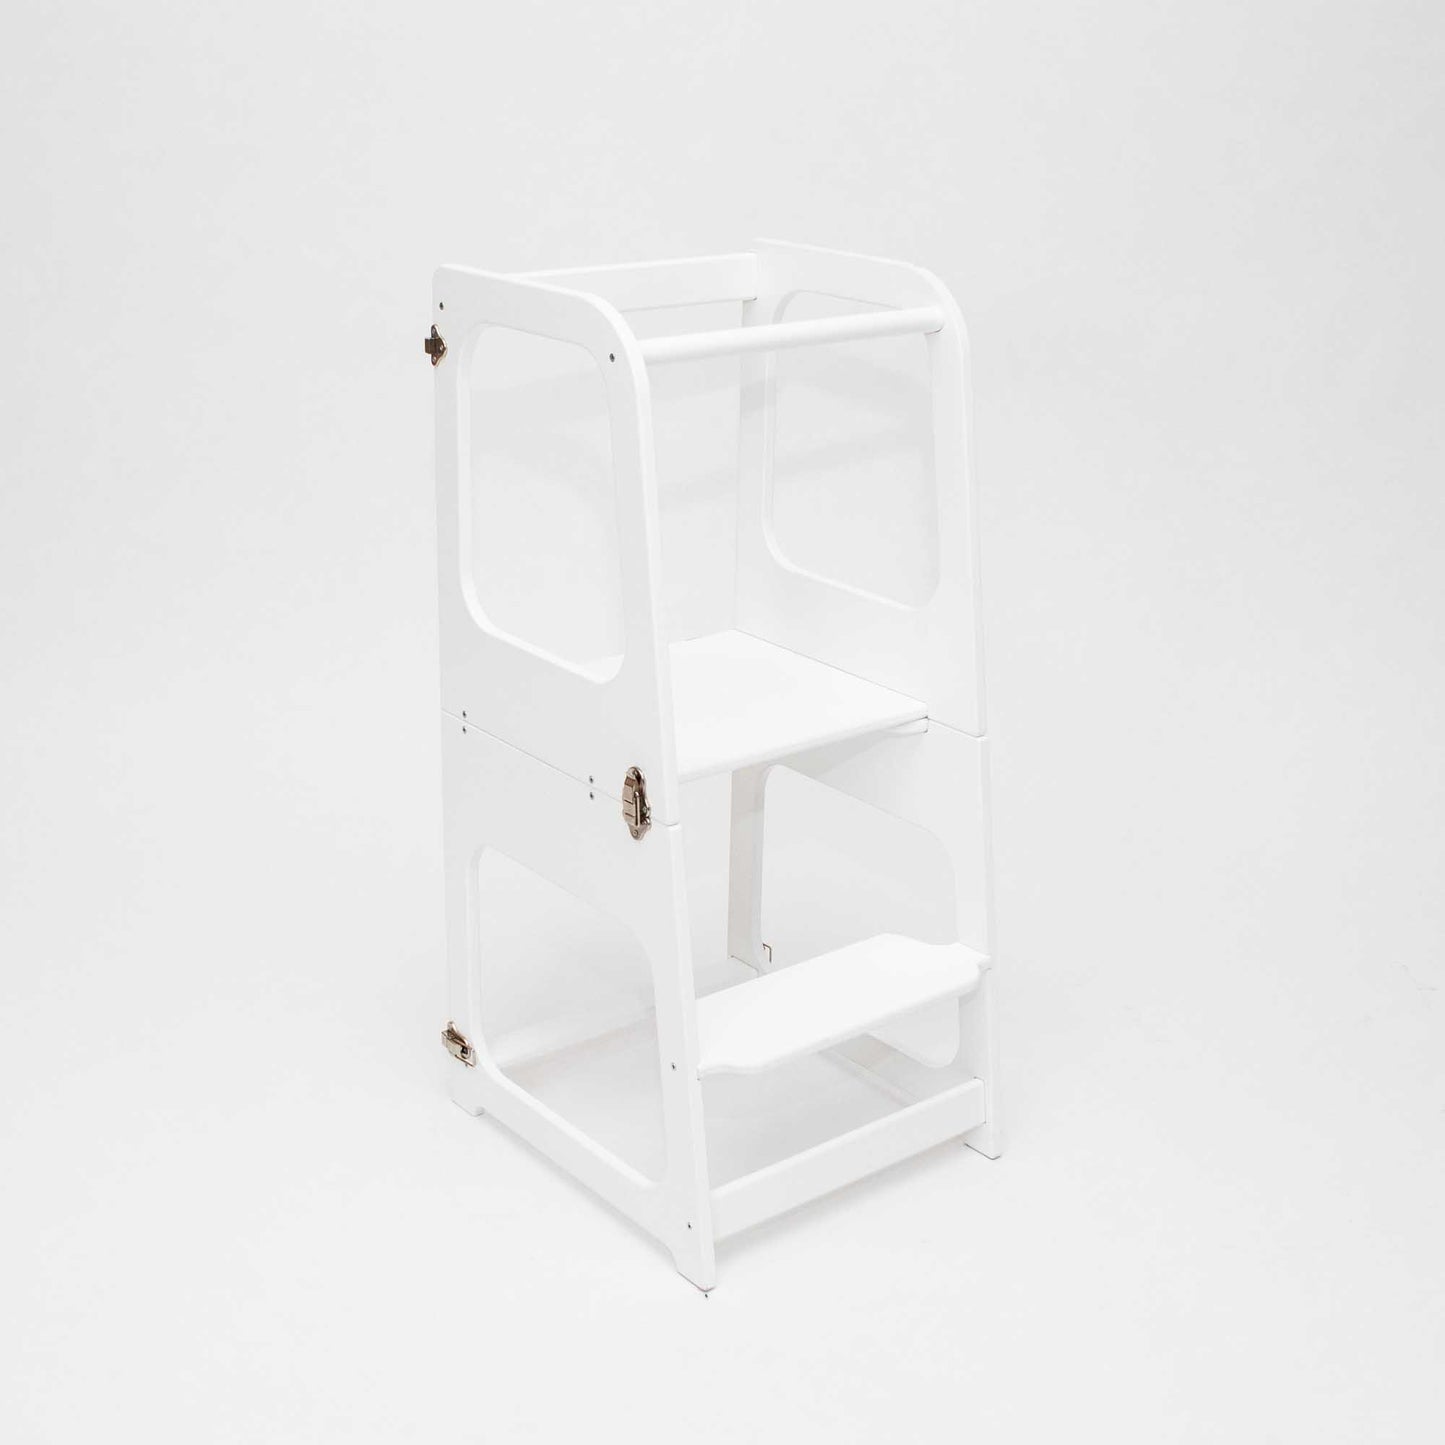 A Sweet Home From Wood 2-in-1 transformable kitchen tower - table and chair on a white background, perfect for kids.